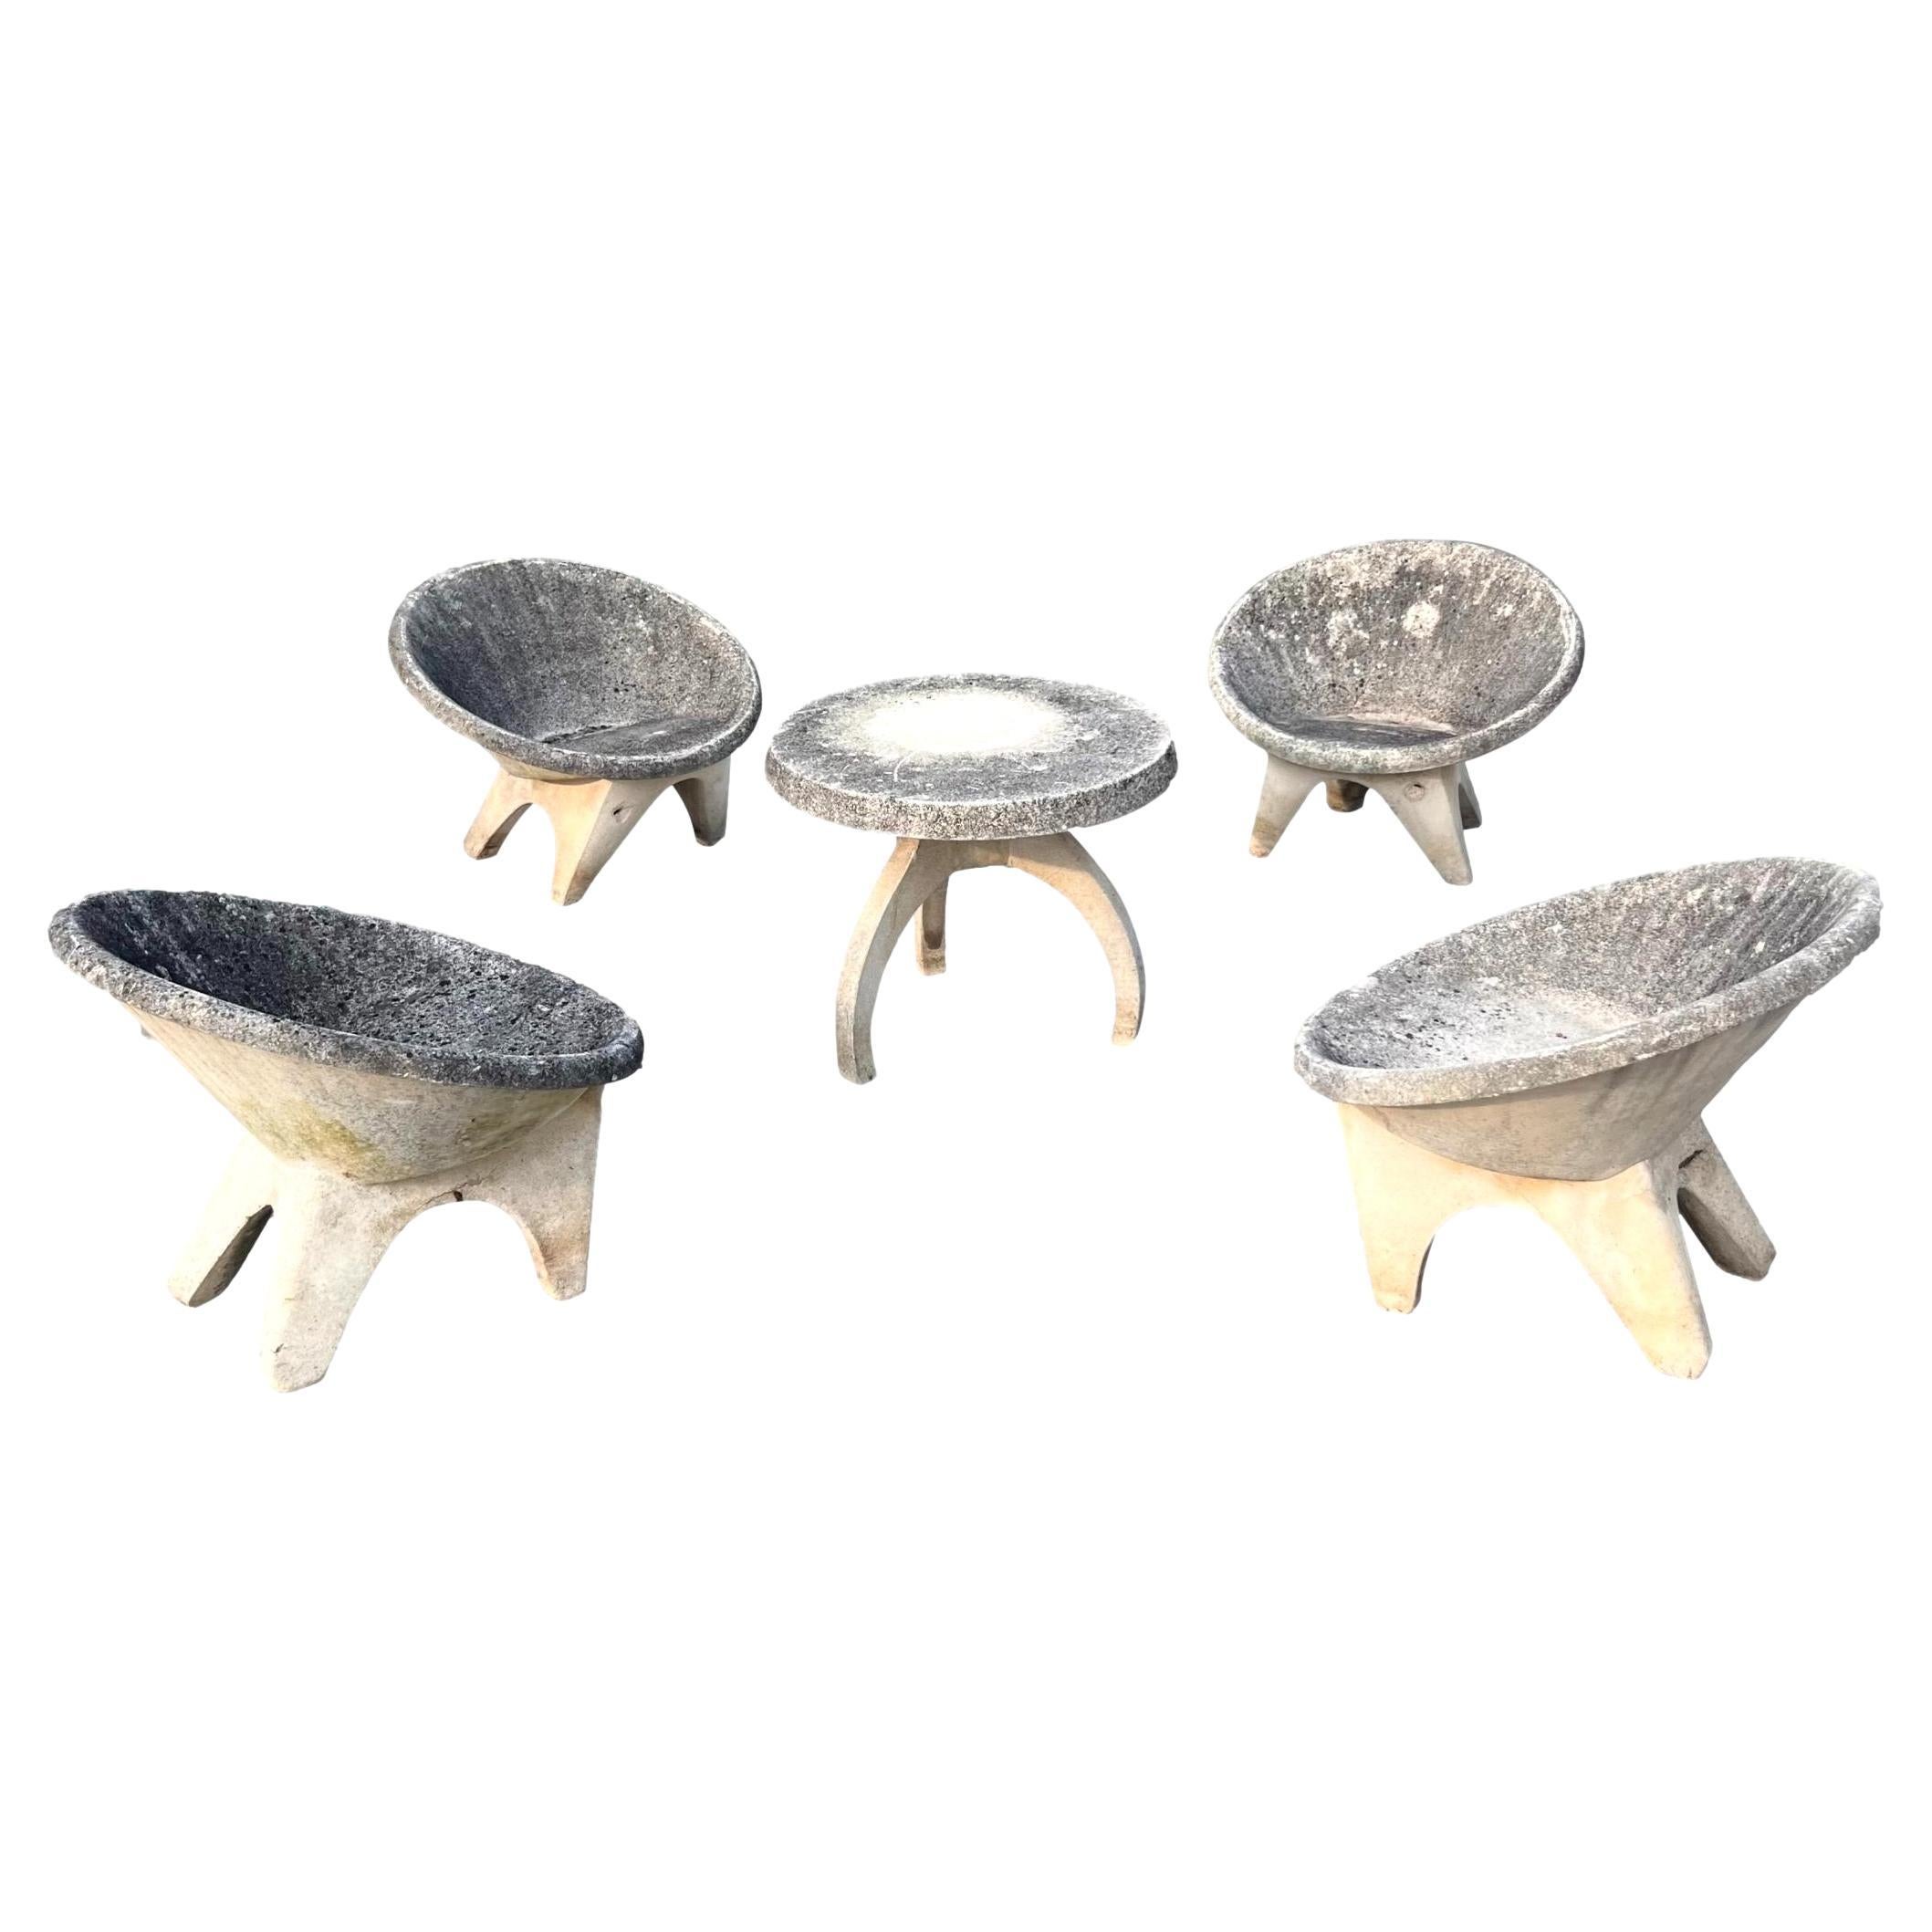 Set of 4 Sculptural Concrete Chairs and Table, 1960s Belgium For Sale